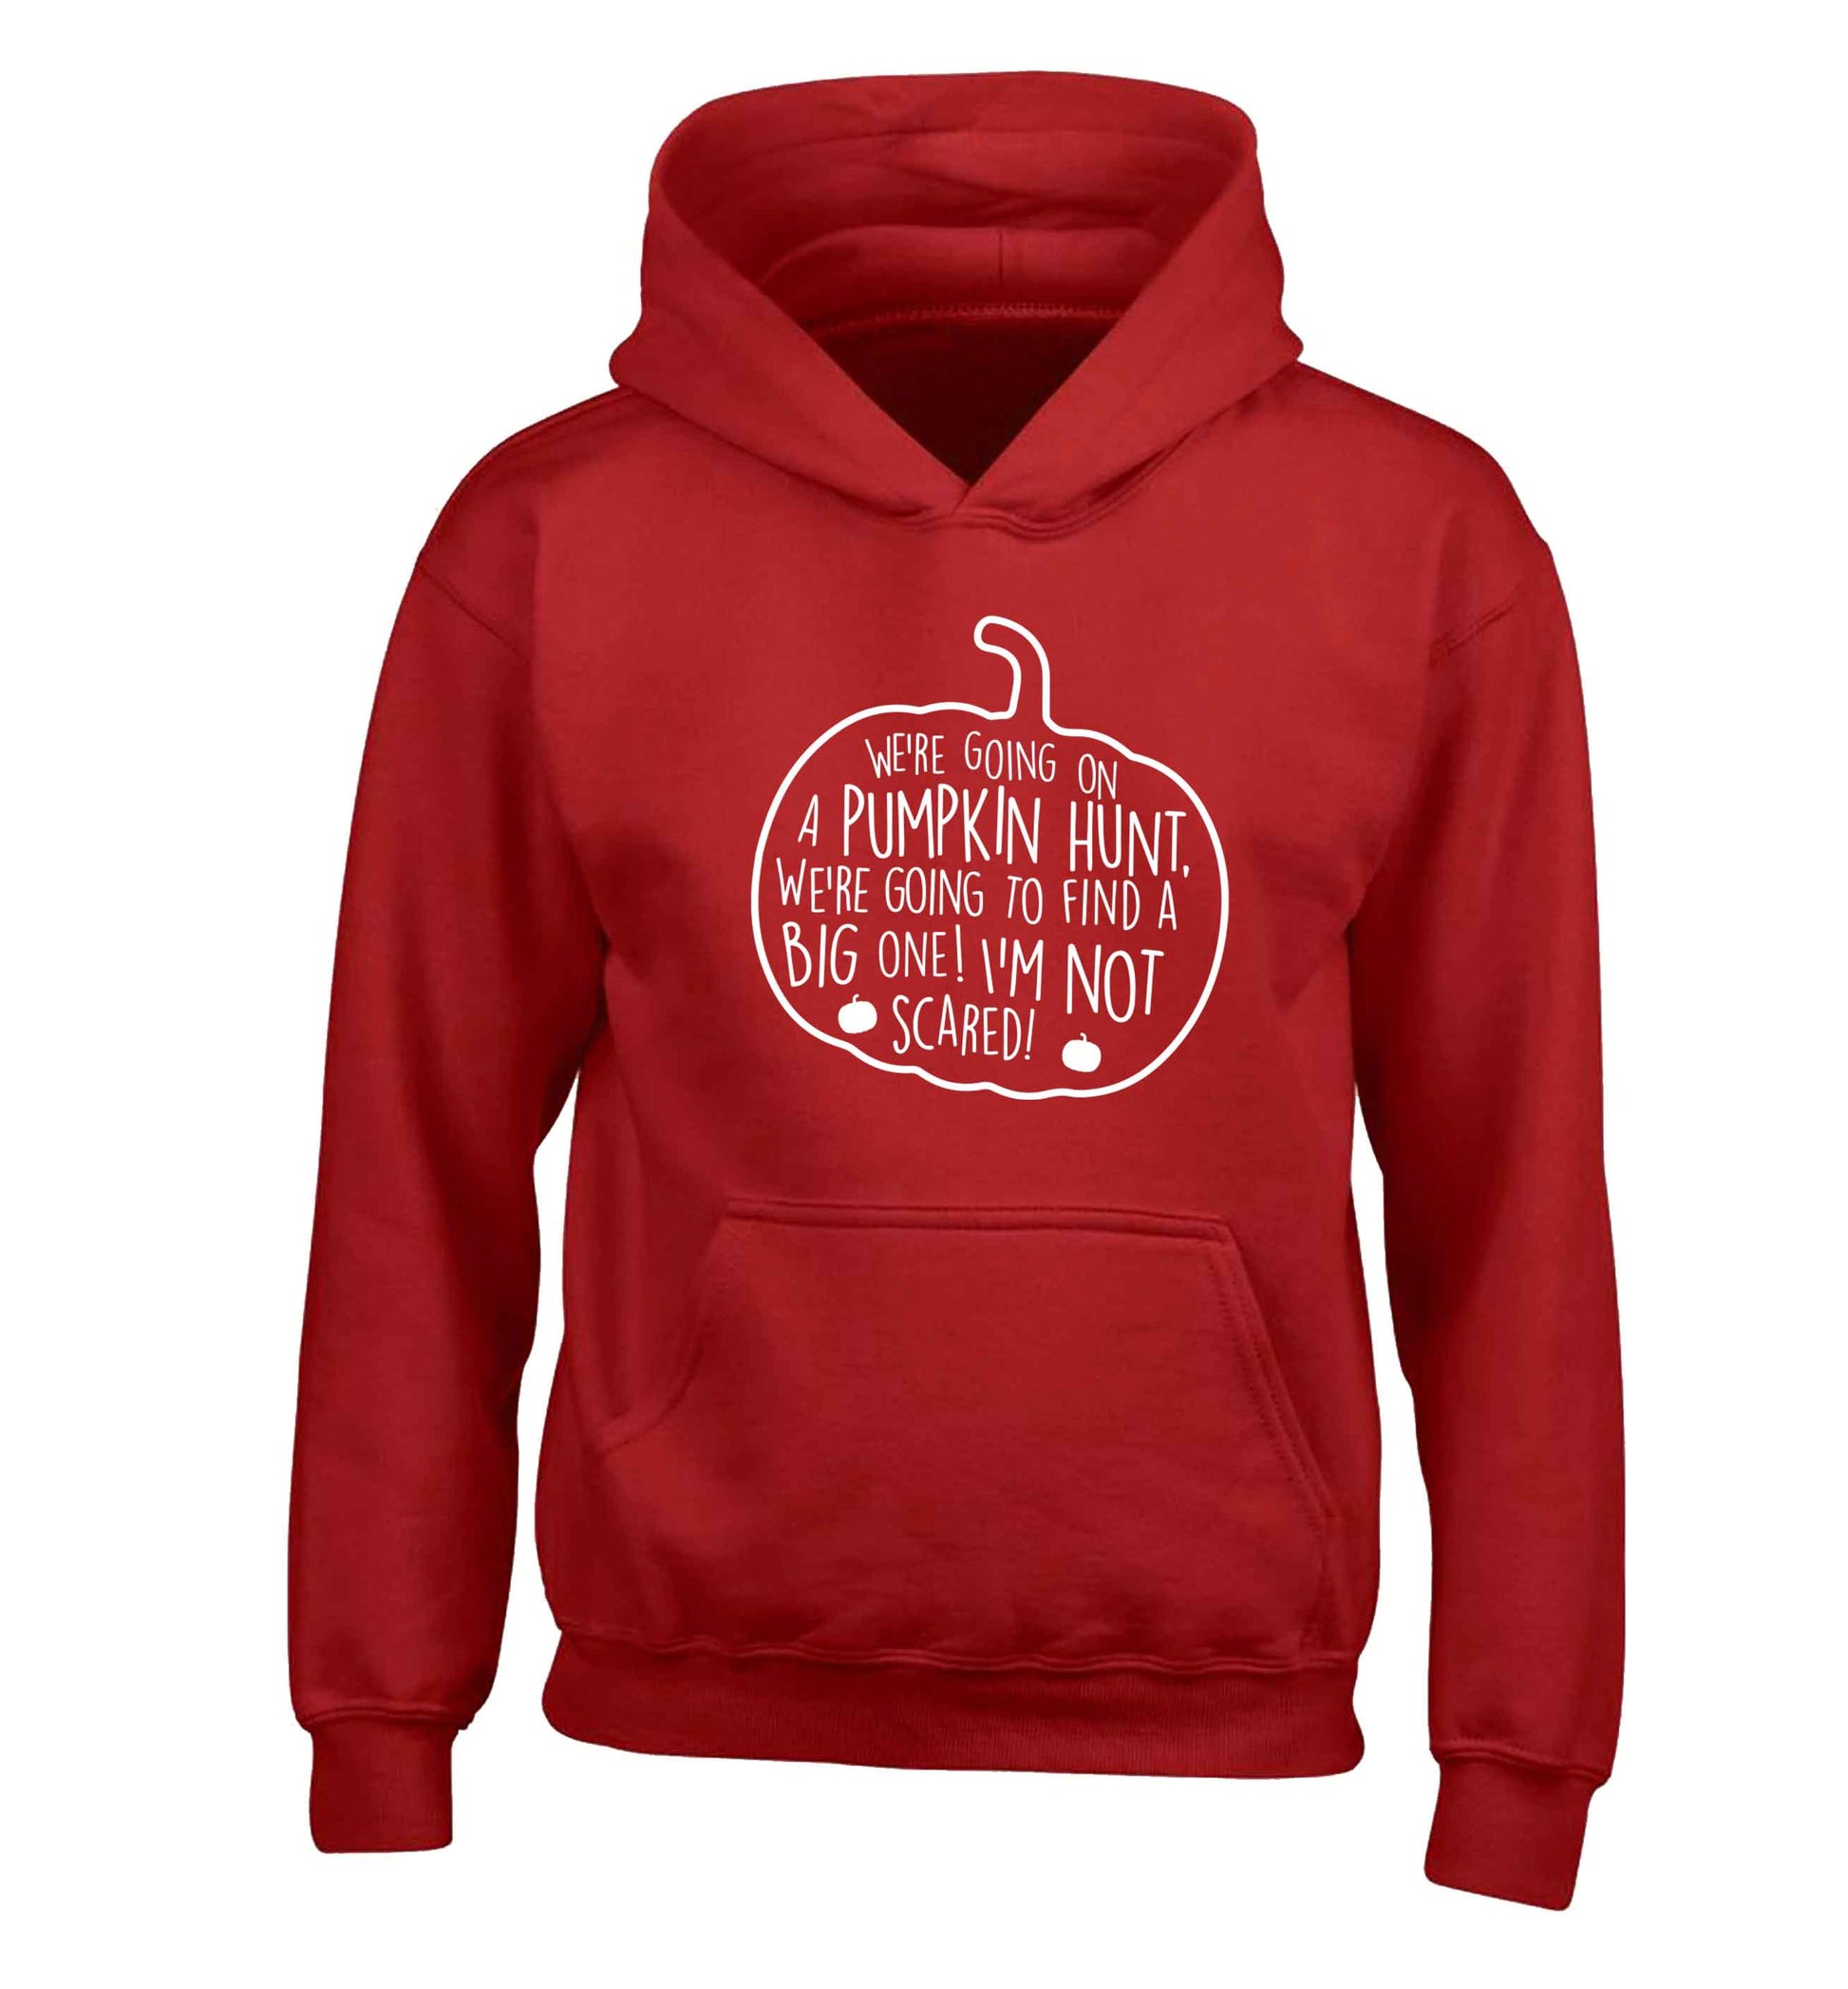 We're going on a pumpkin hunt children's red hoodie 12-13 Years